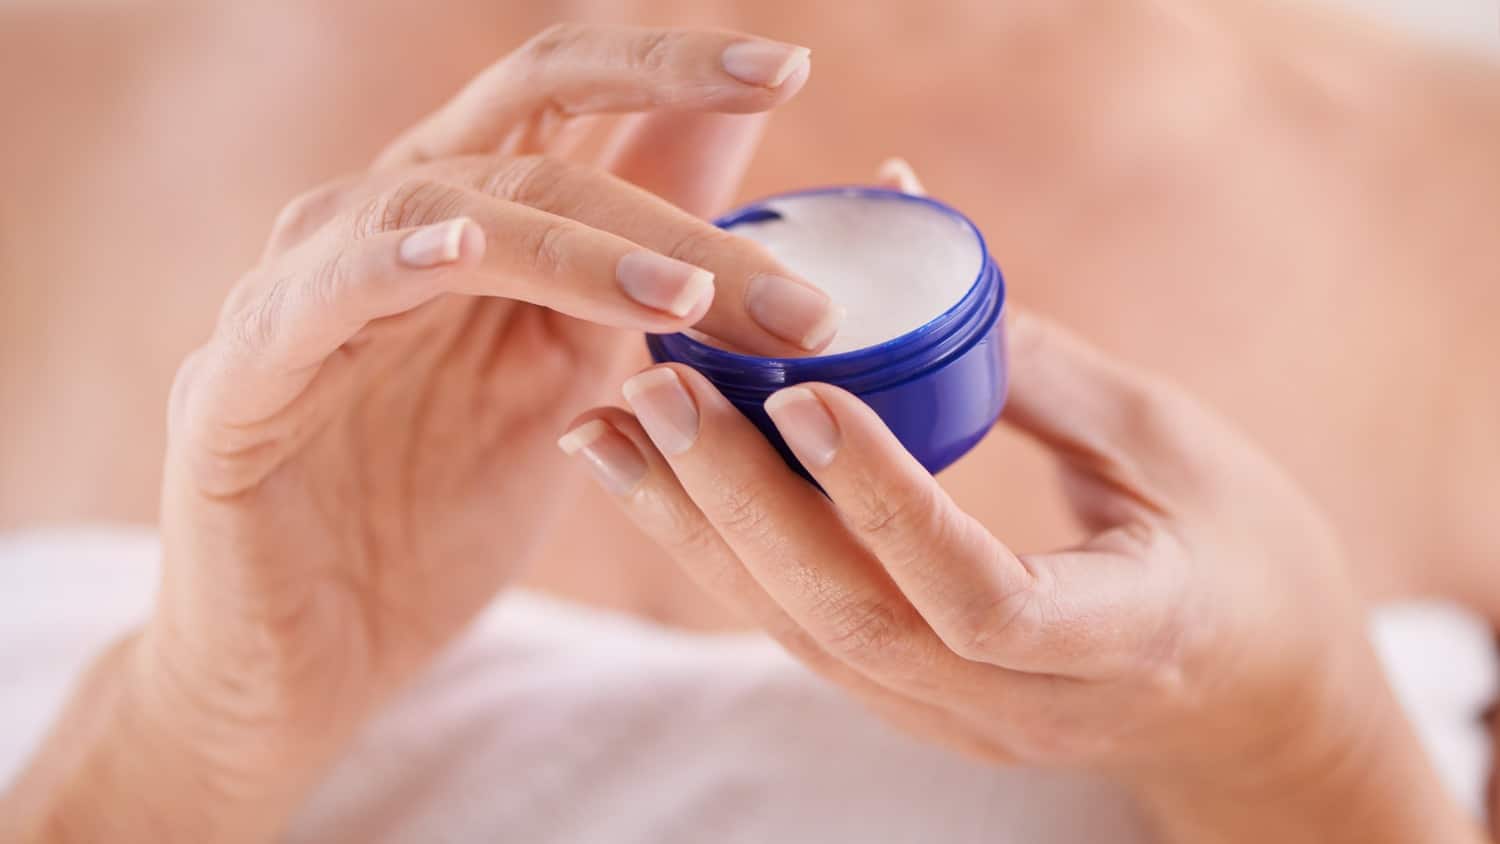 10 Fragrance-Free Beauty Products for Women Over 50